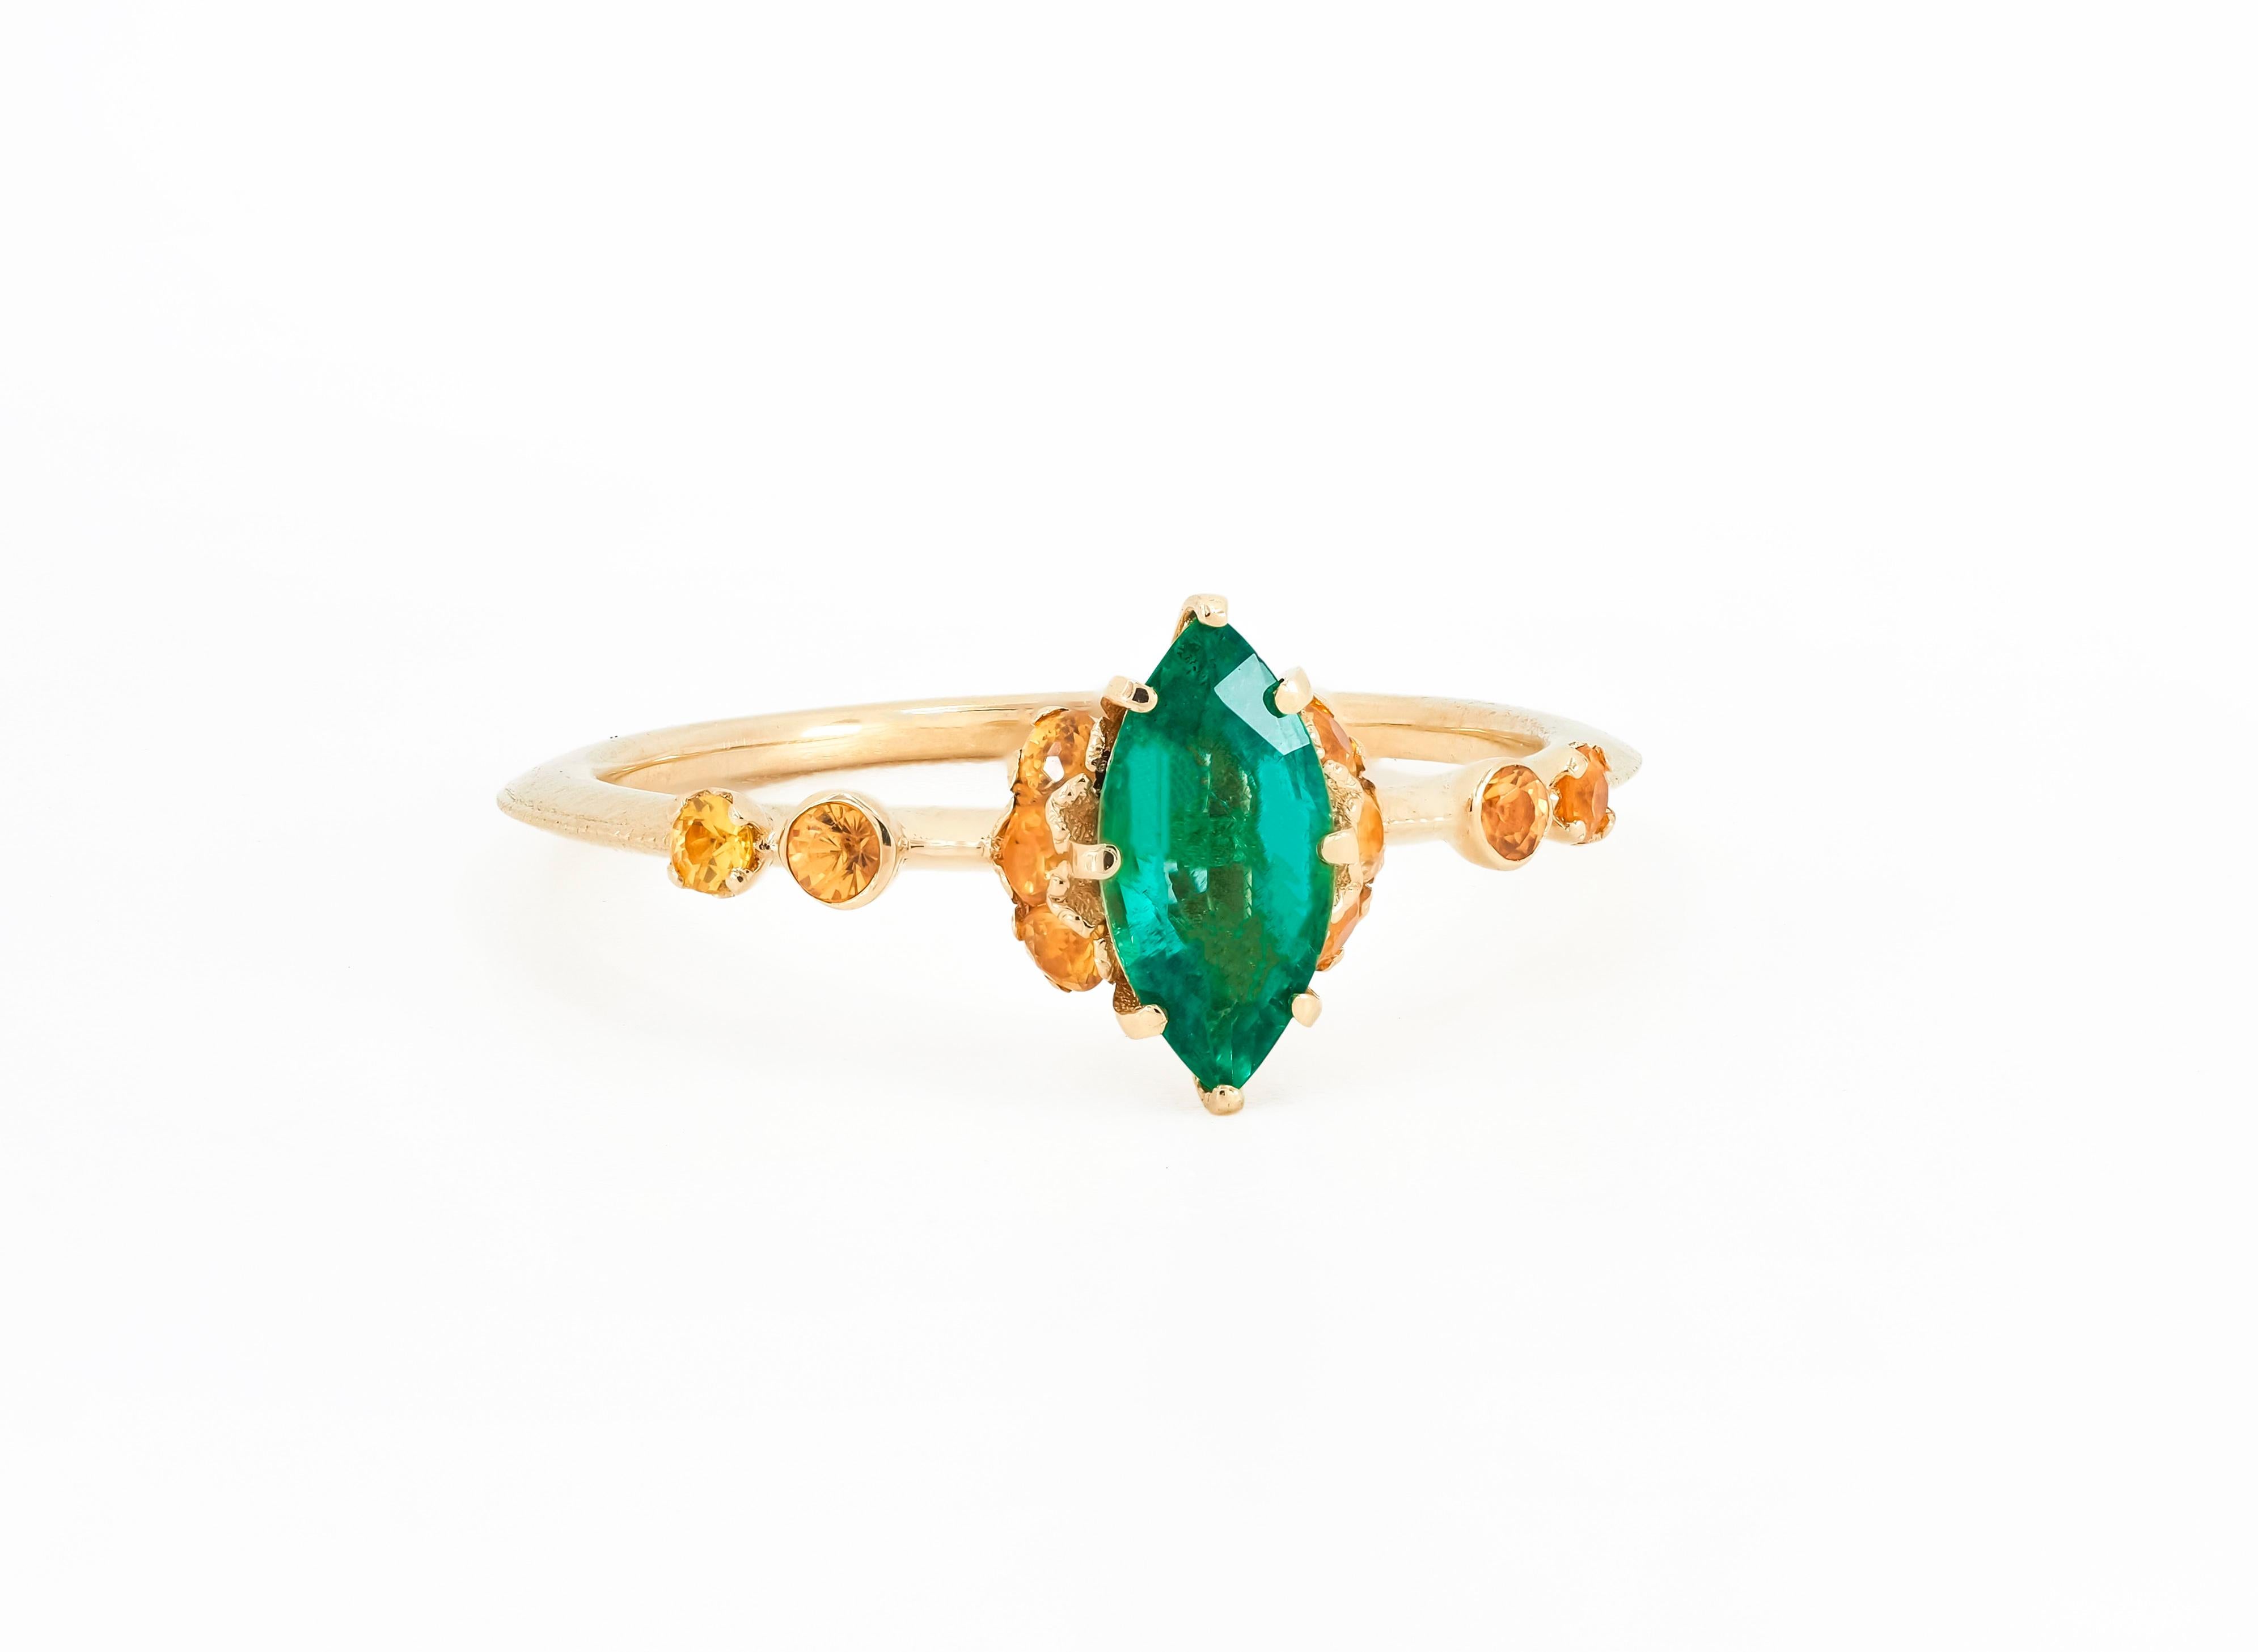 Women's 14 Karat Gold Ring with Emerald and Sapphires